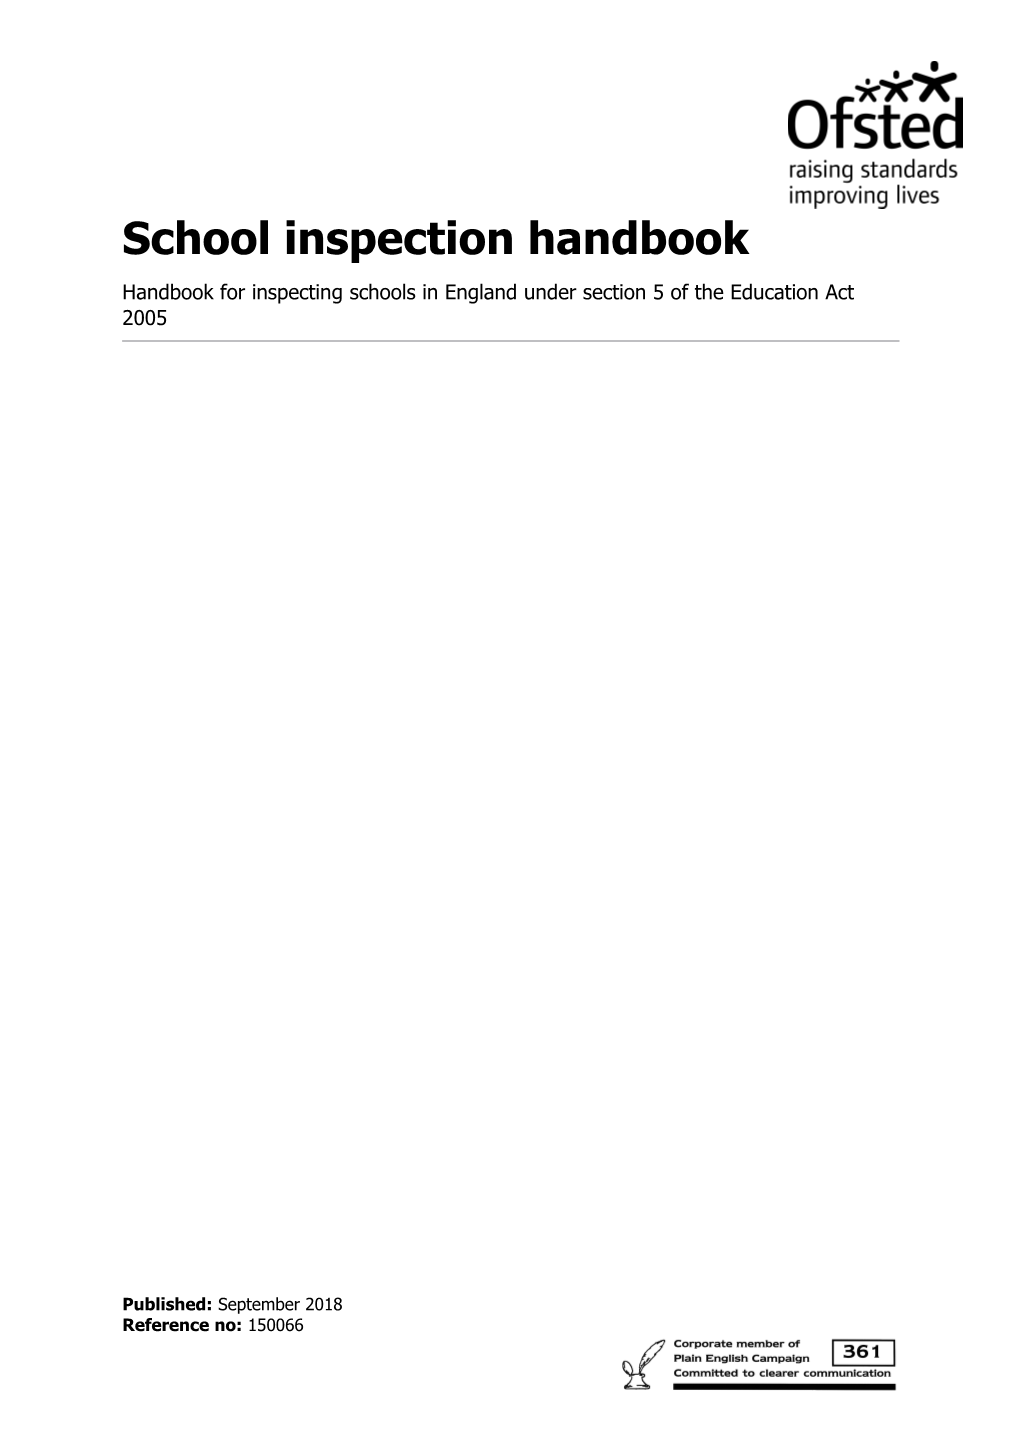 Ofsted: School Inspection Handbook (Section 5)